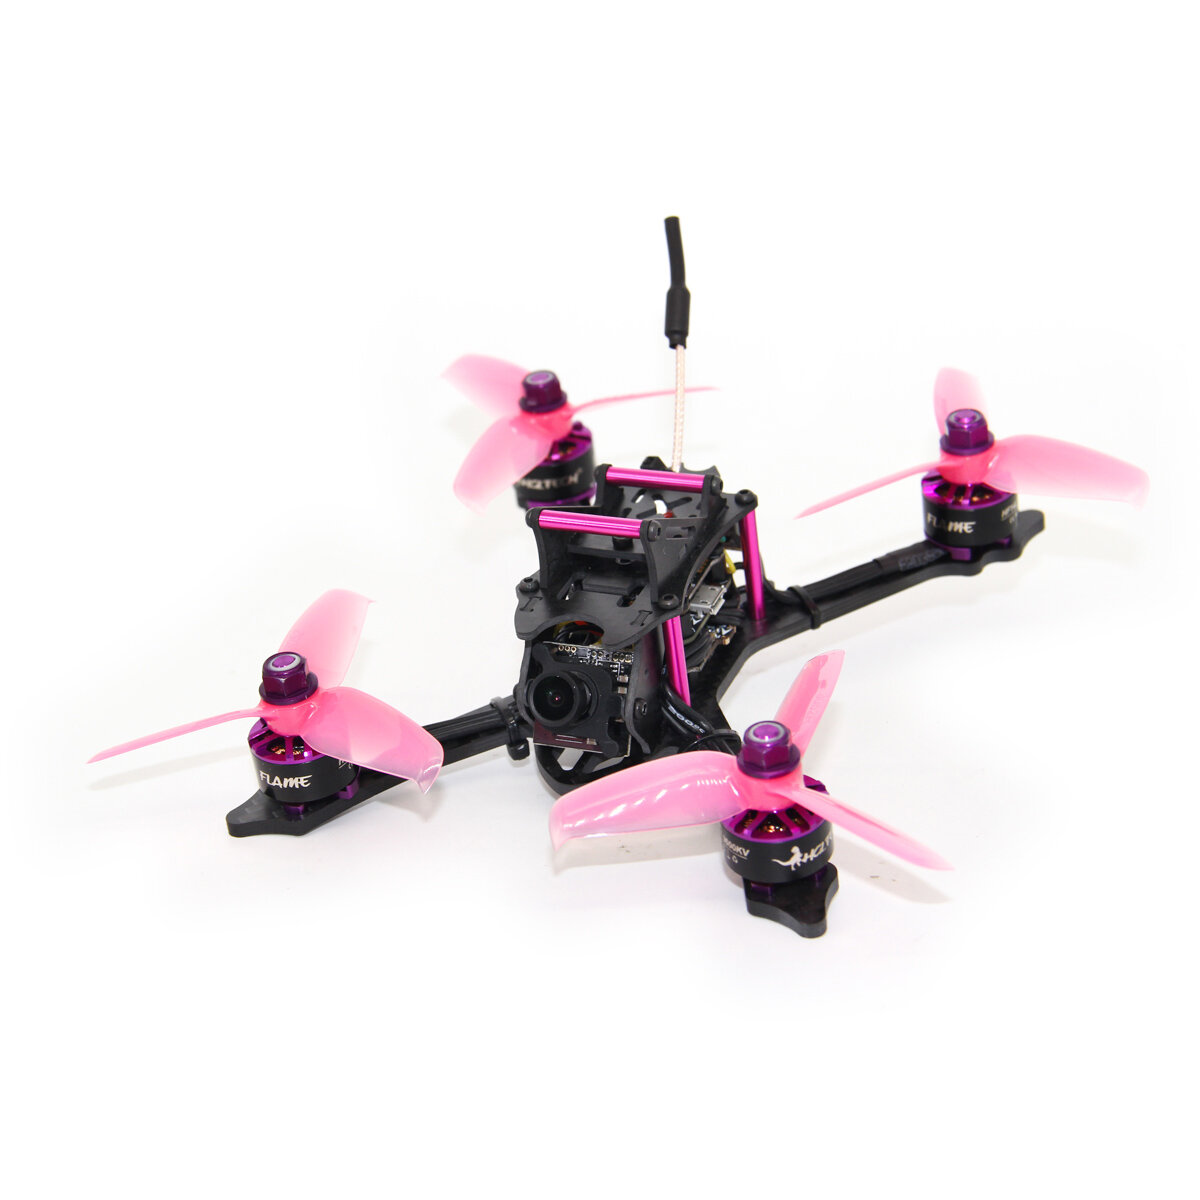 HGLRC XJB-145MM RC Drone FPV Racing PNP Omnibus F4 2-4S 28A Blheli_S ESC  25/100/ Sale - Banggood USA sold out-arrival notice-arrival notice